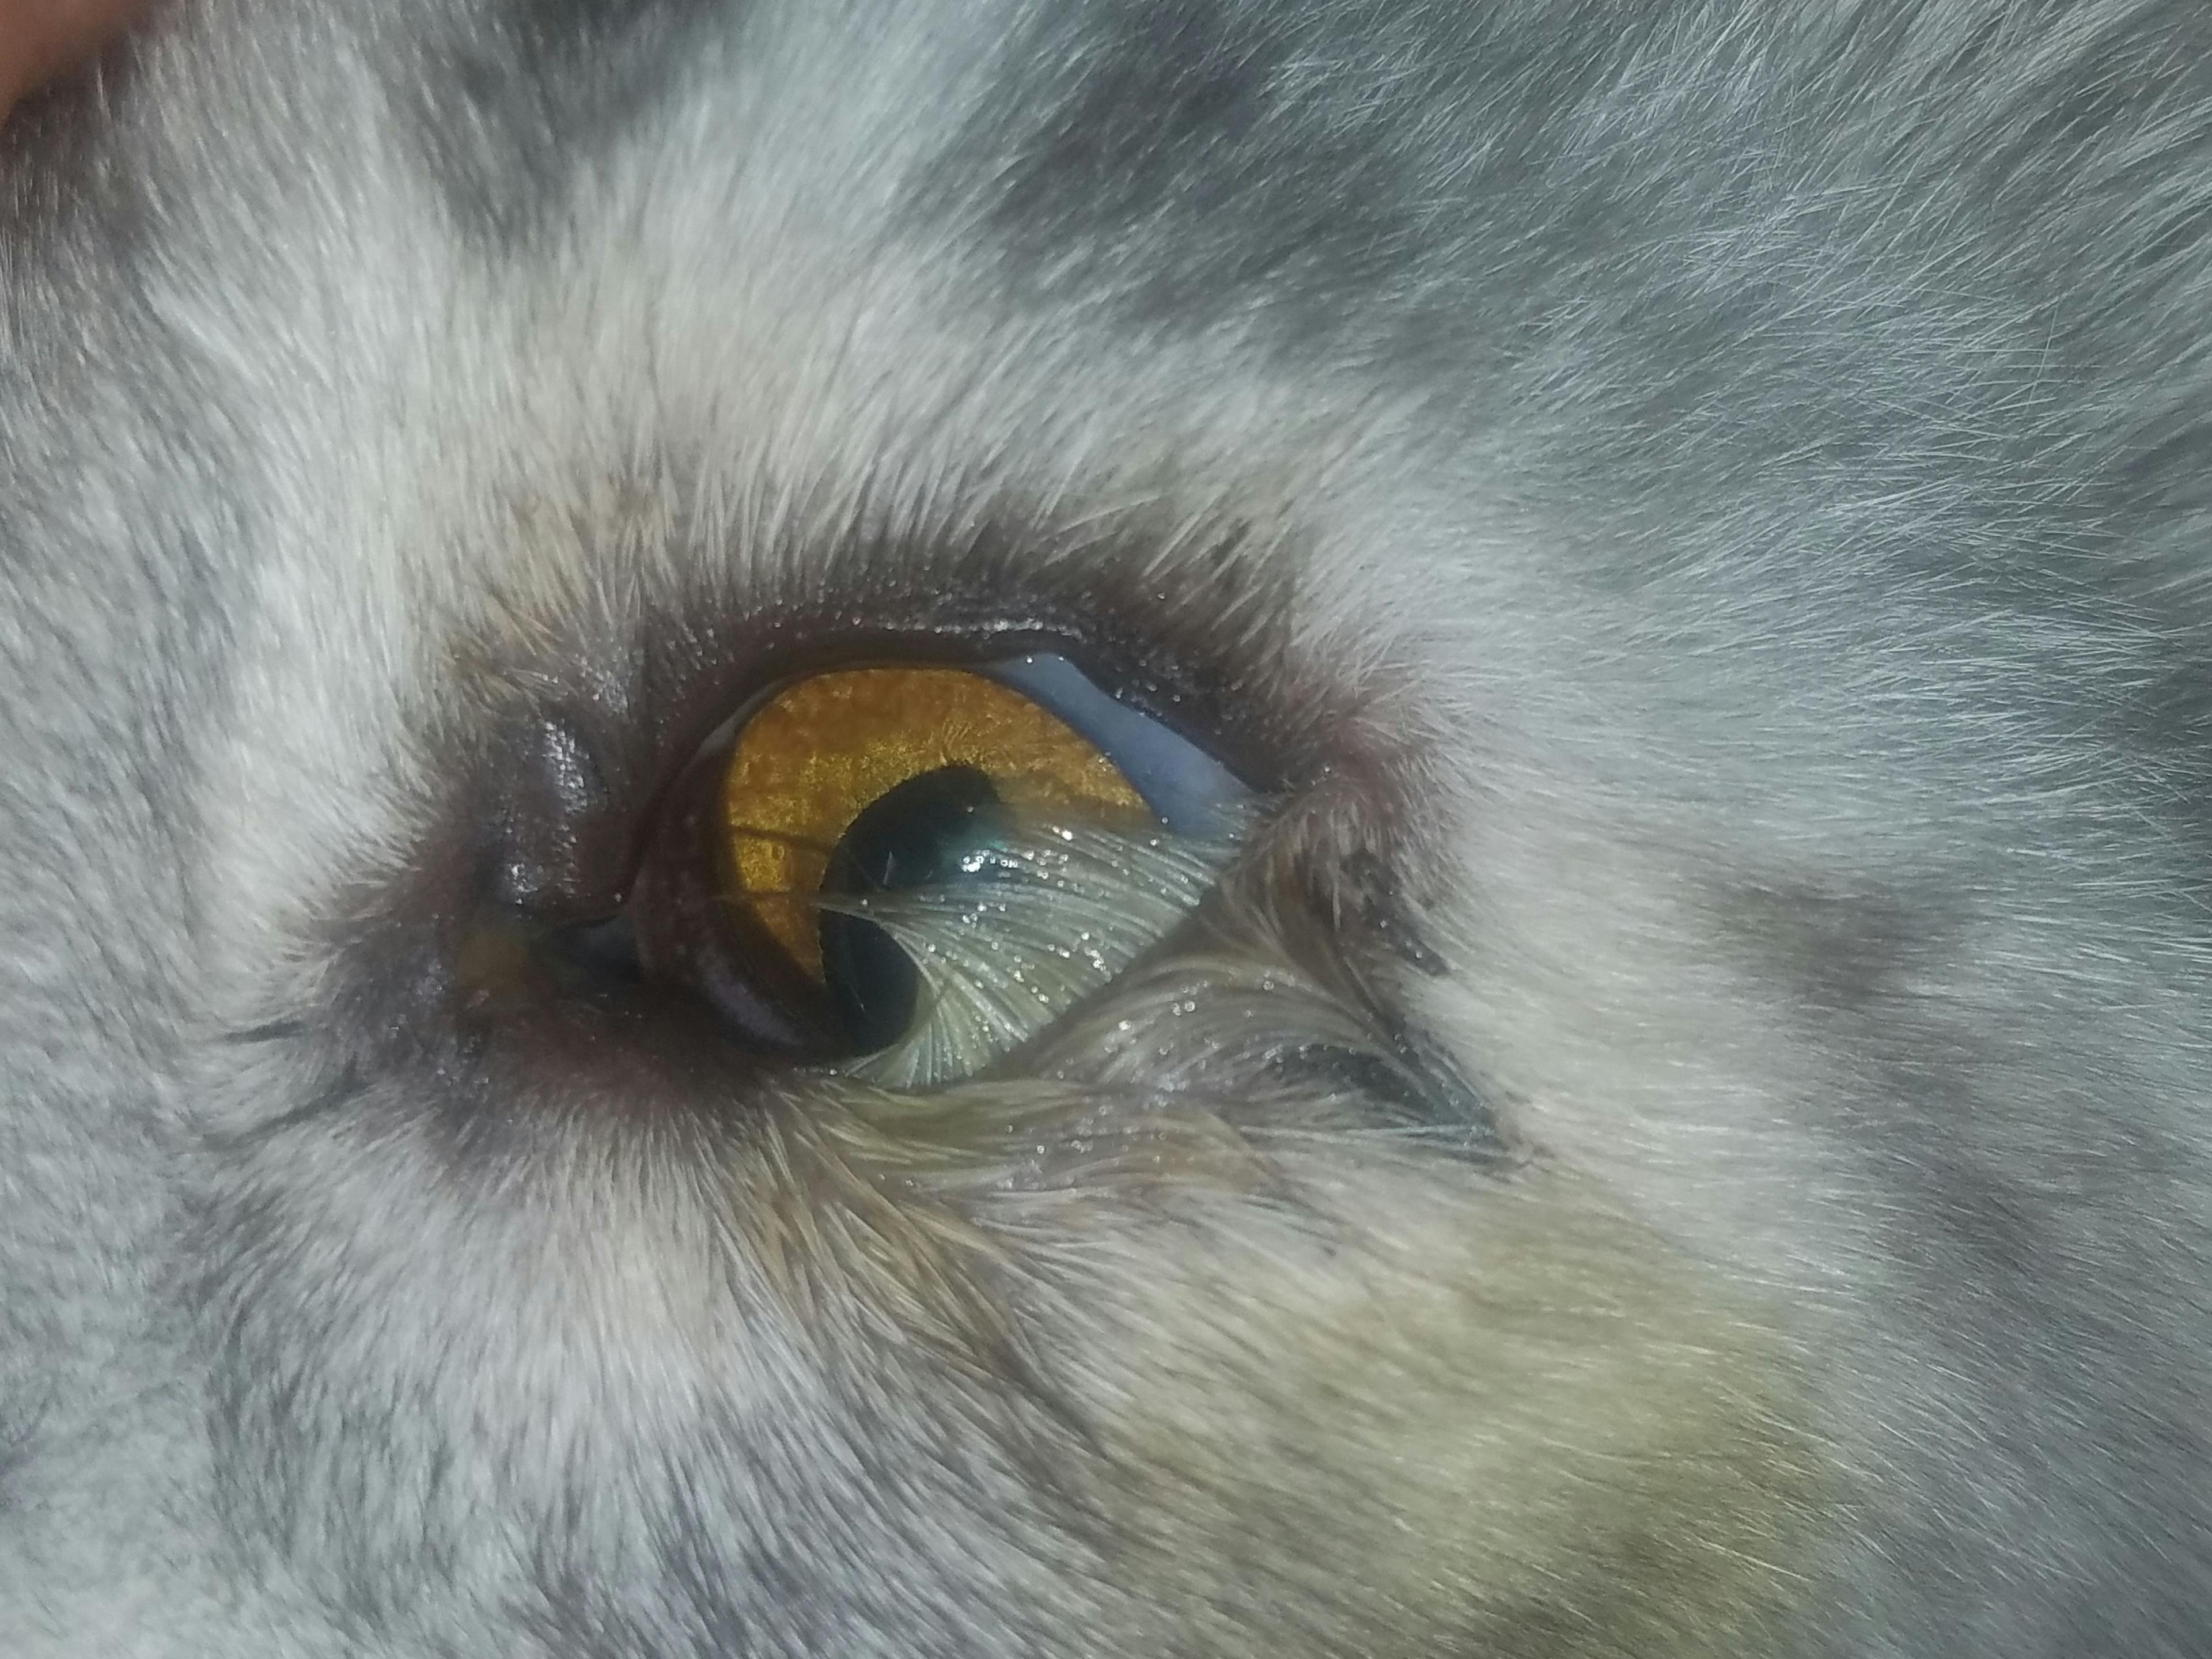 Figure 2. A cat with severe entropion, or eversion of the lower eyelid. This results in irritation of the cornea and potential ulceration.